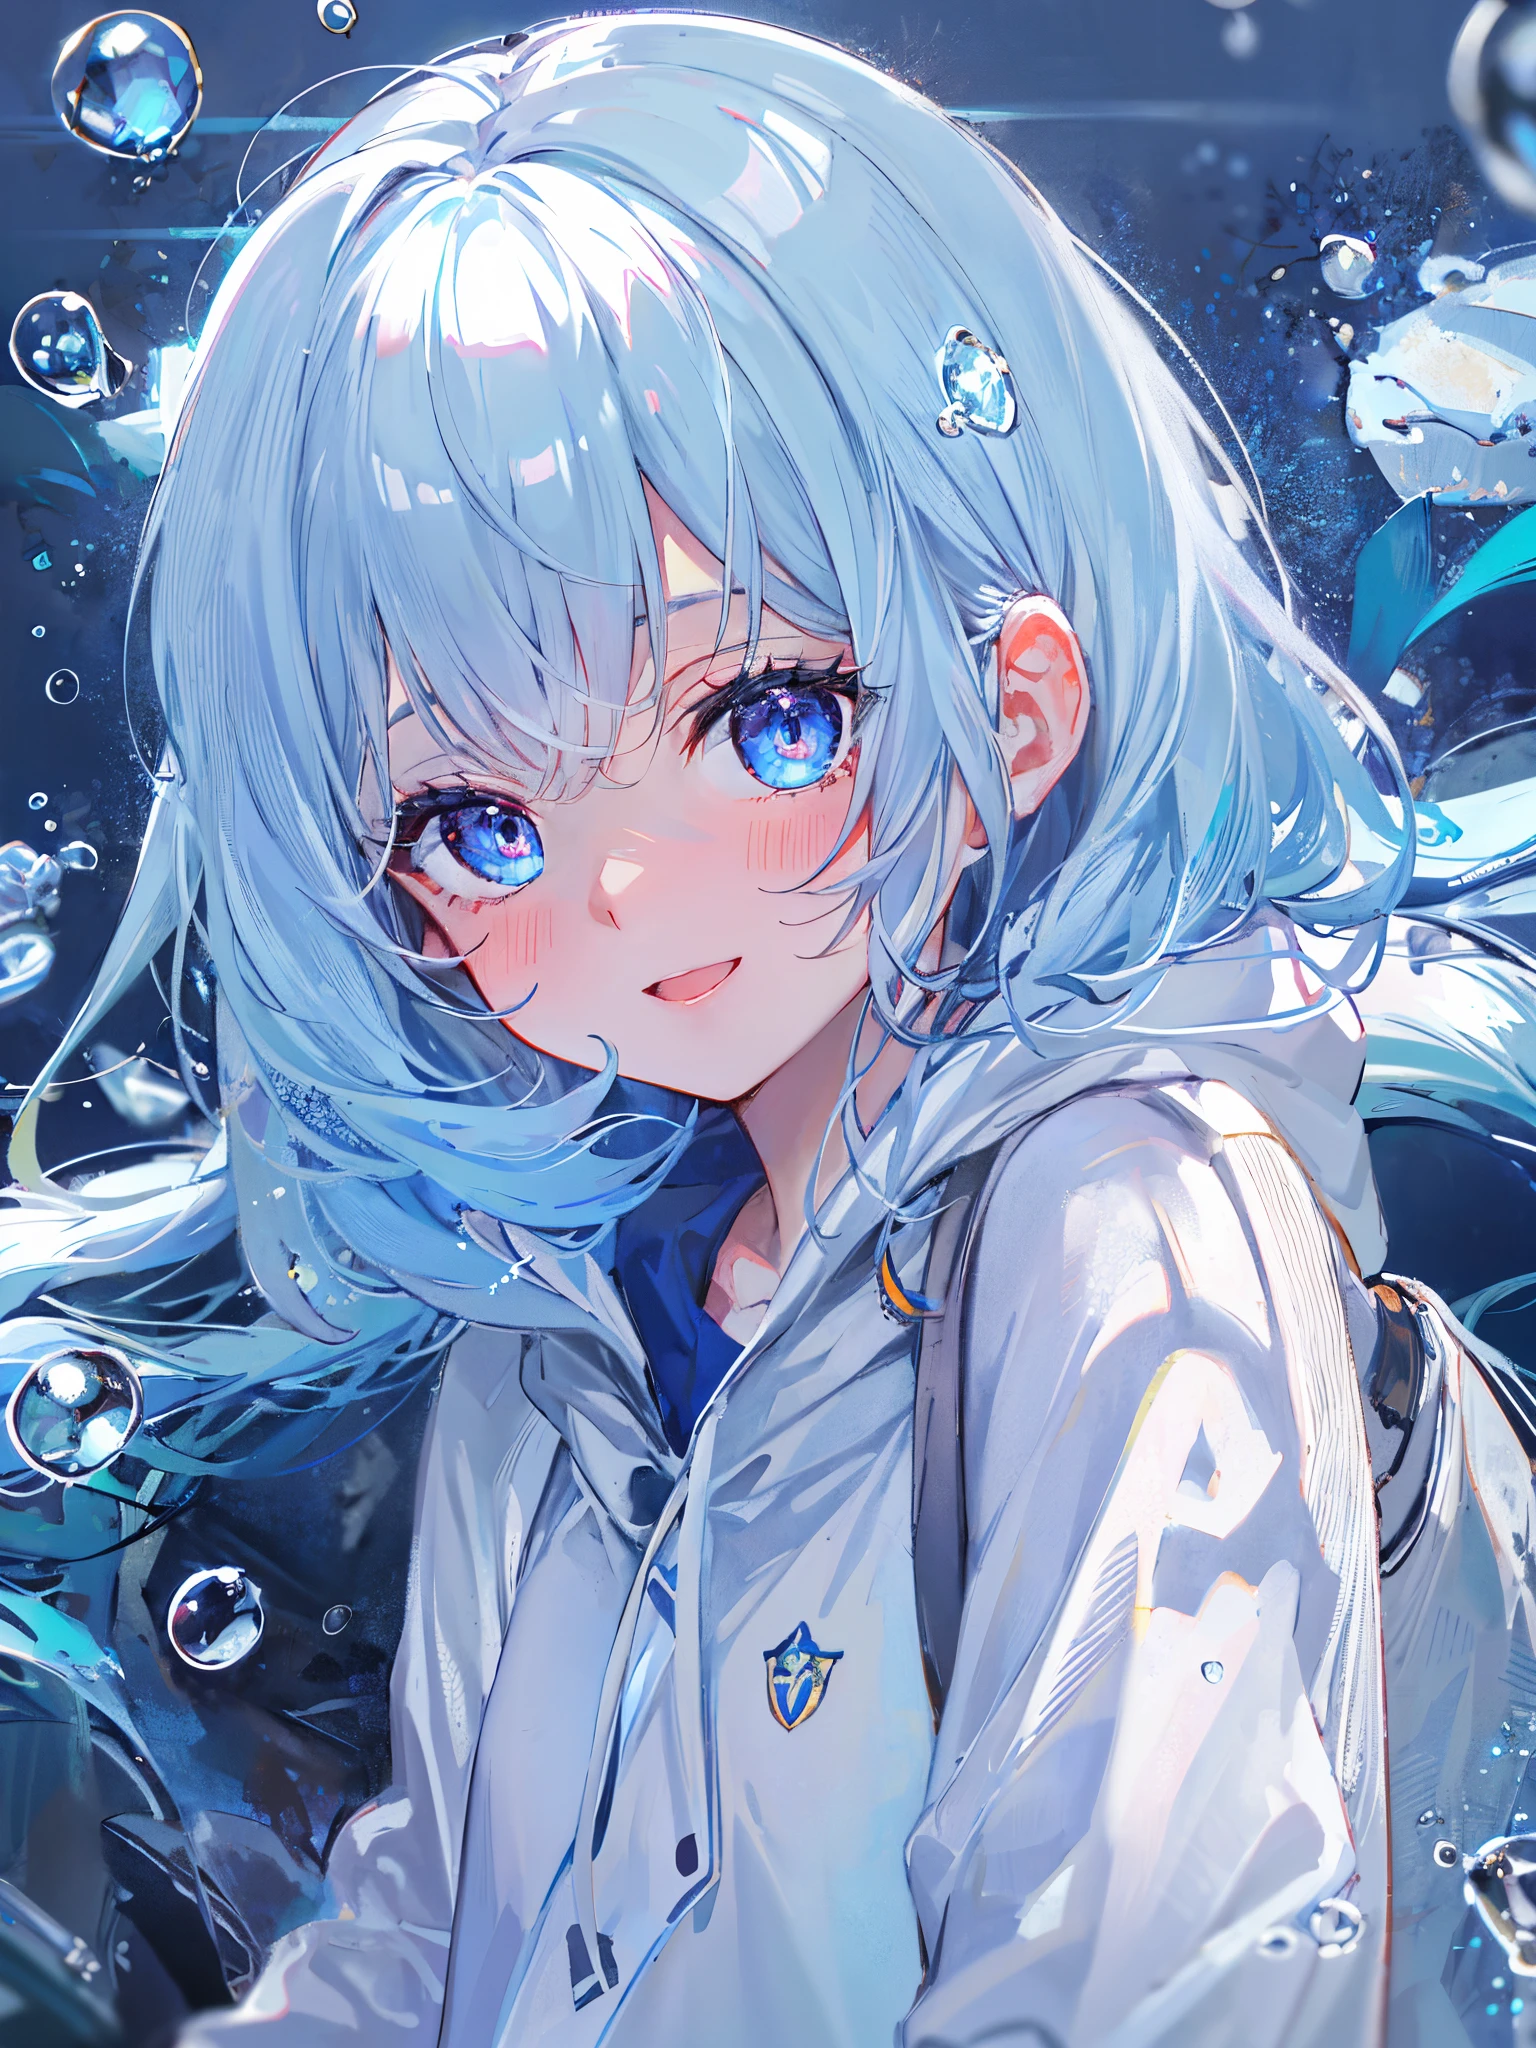 ((top-quality)), ((​masterpiece)), ((ultra-detailliert)), (Extremely delicate and beautiful), girl with, report, cold attitude,((White hoodie)),She is very(relax)with  the(Settled down)Looks,depth of fields,Evil smile,Bubble, under the water, Air bubble,Underwater world bright light blue eyes,inner color with bright gray hair and light blue tips,,,,,,,,,,,,,,,,,,,,,,Cold background,Bob Hair - Linear Art, shortpants、knee high socks、White uniform like 、Light blue ribbon ties、Clothes are sheer、The hand in my right pocket is like a sapphire,Fronllesse Blue, A small blue light was floating、fantastic eyes、selfy,Self-shot、Bangs fall on the eyes, give a sexy impression.